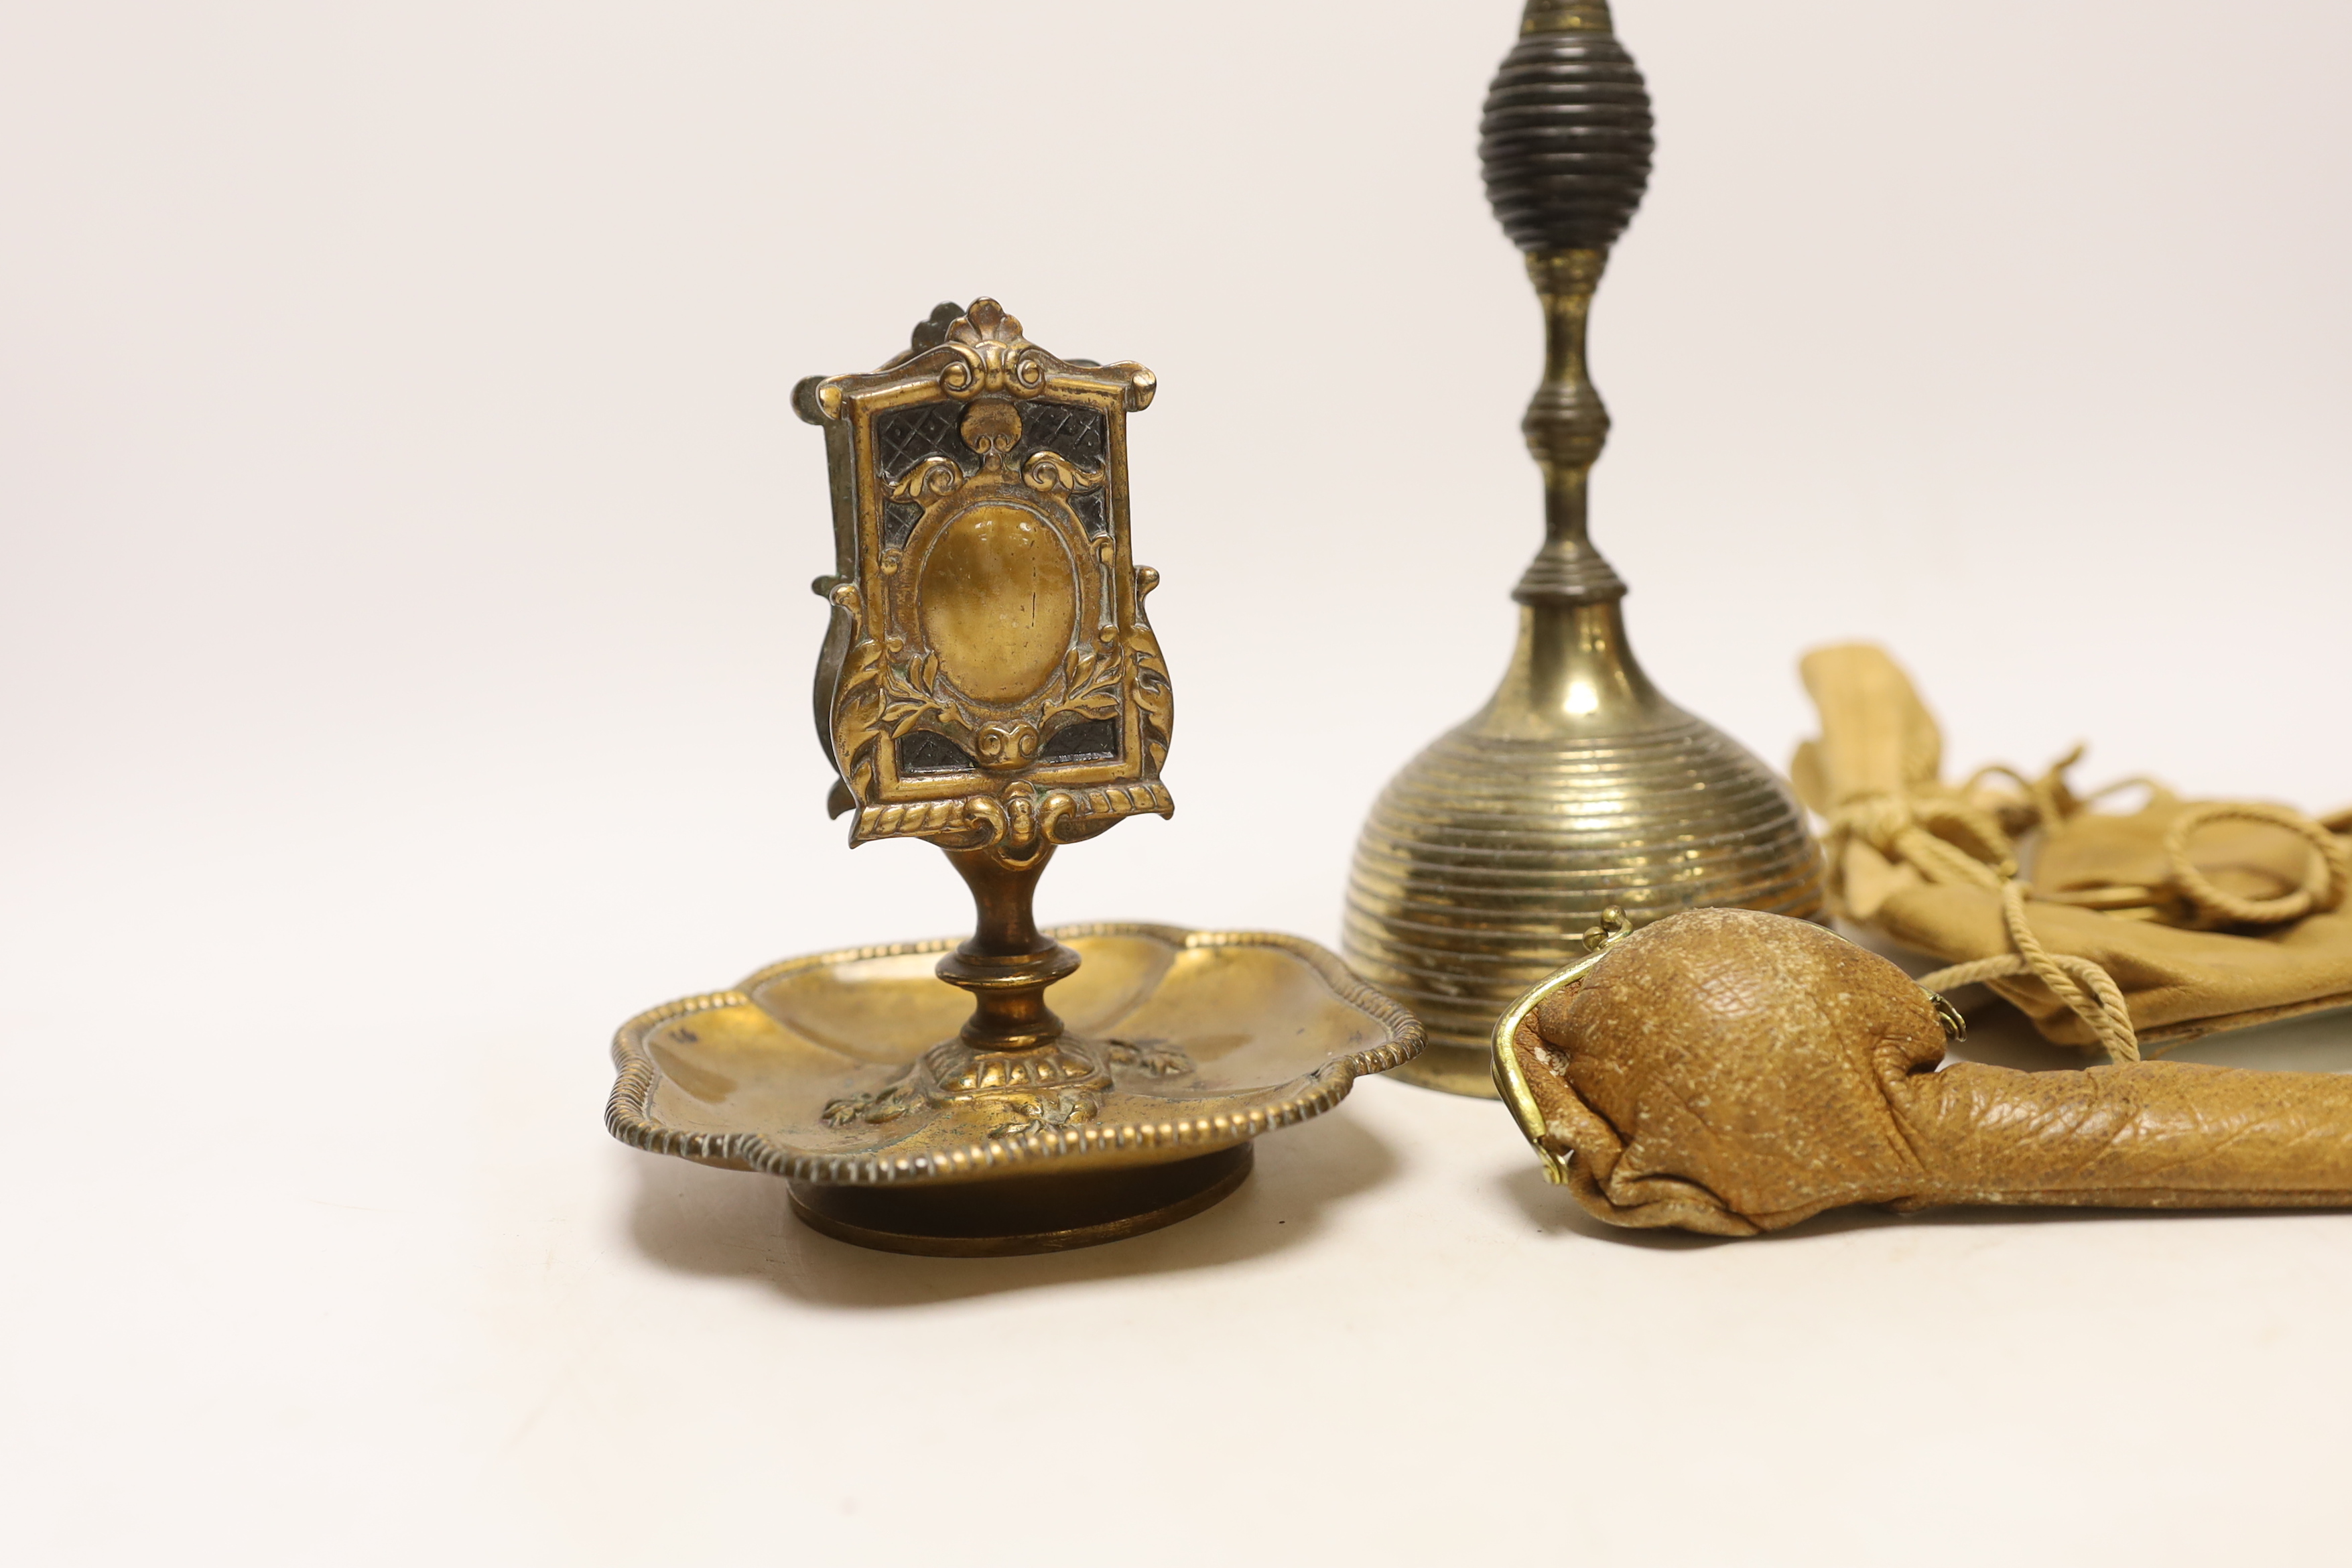 A group of collectables including a bell, a matchbox holder, a pendant, a brooch, etc.